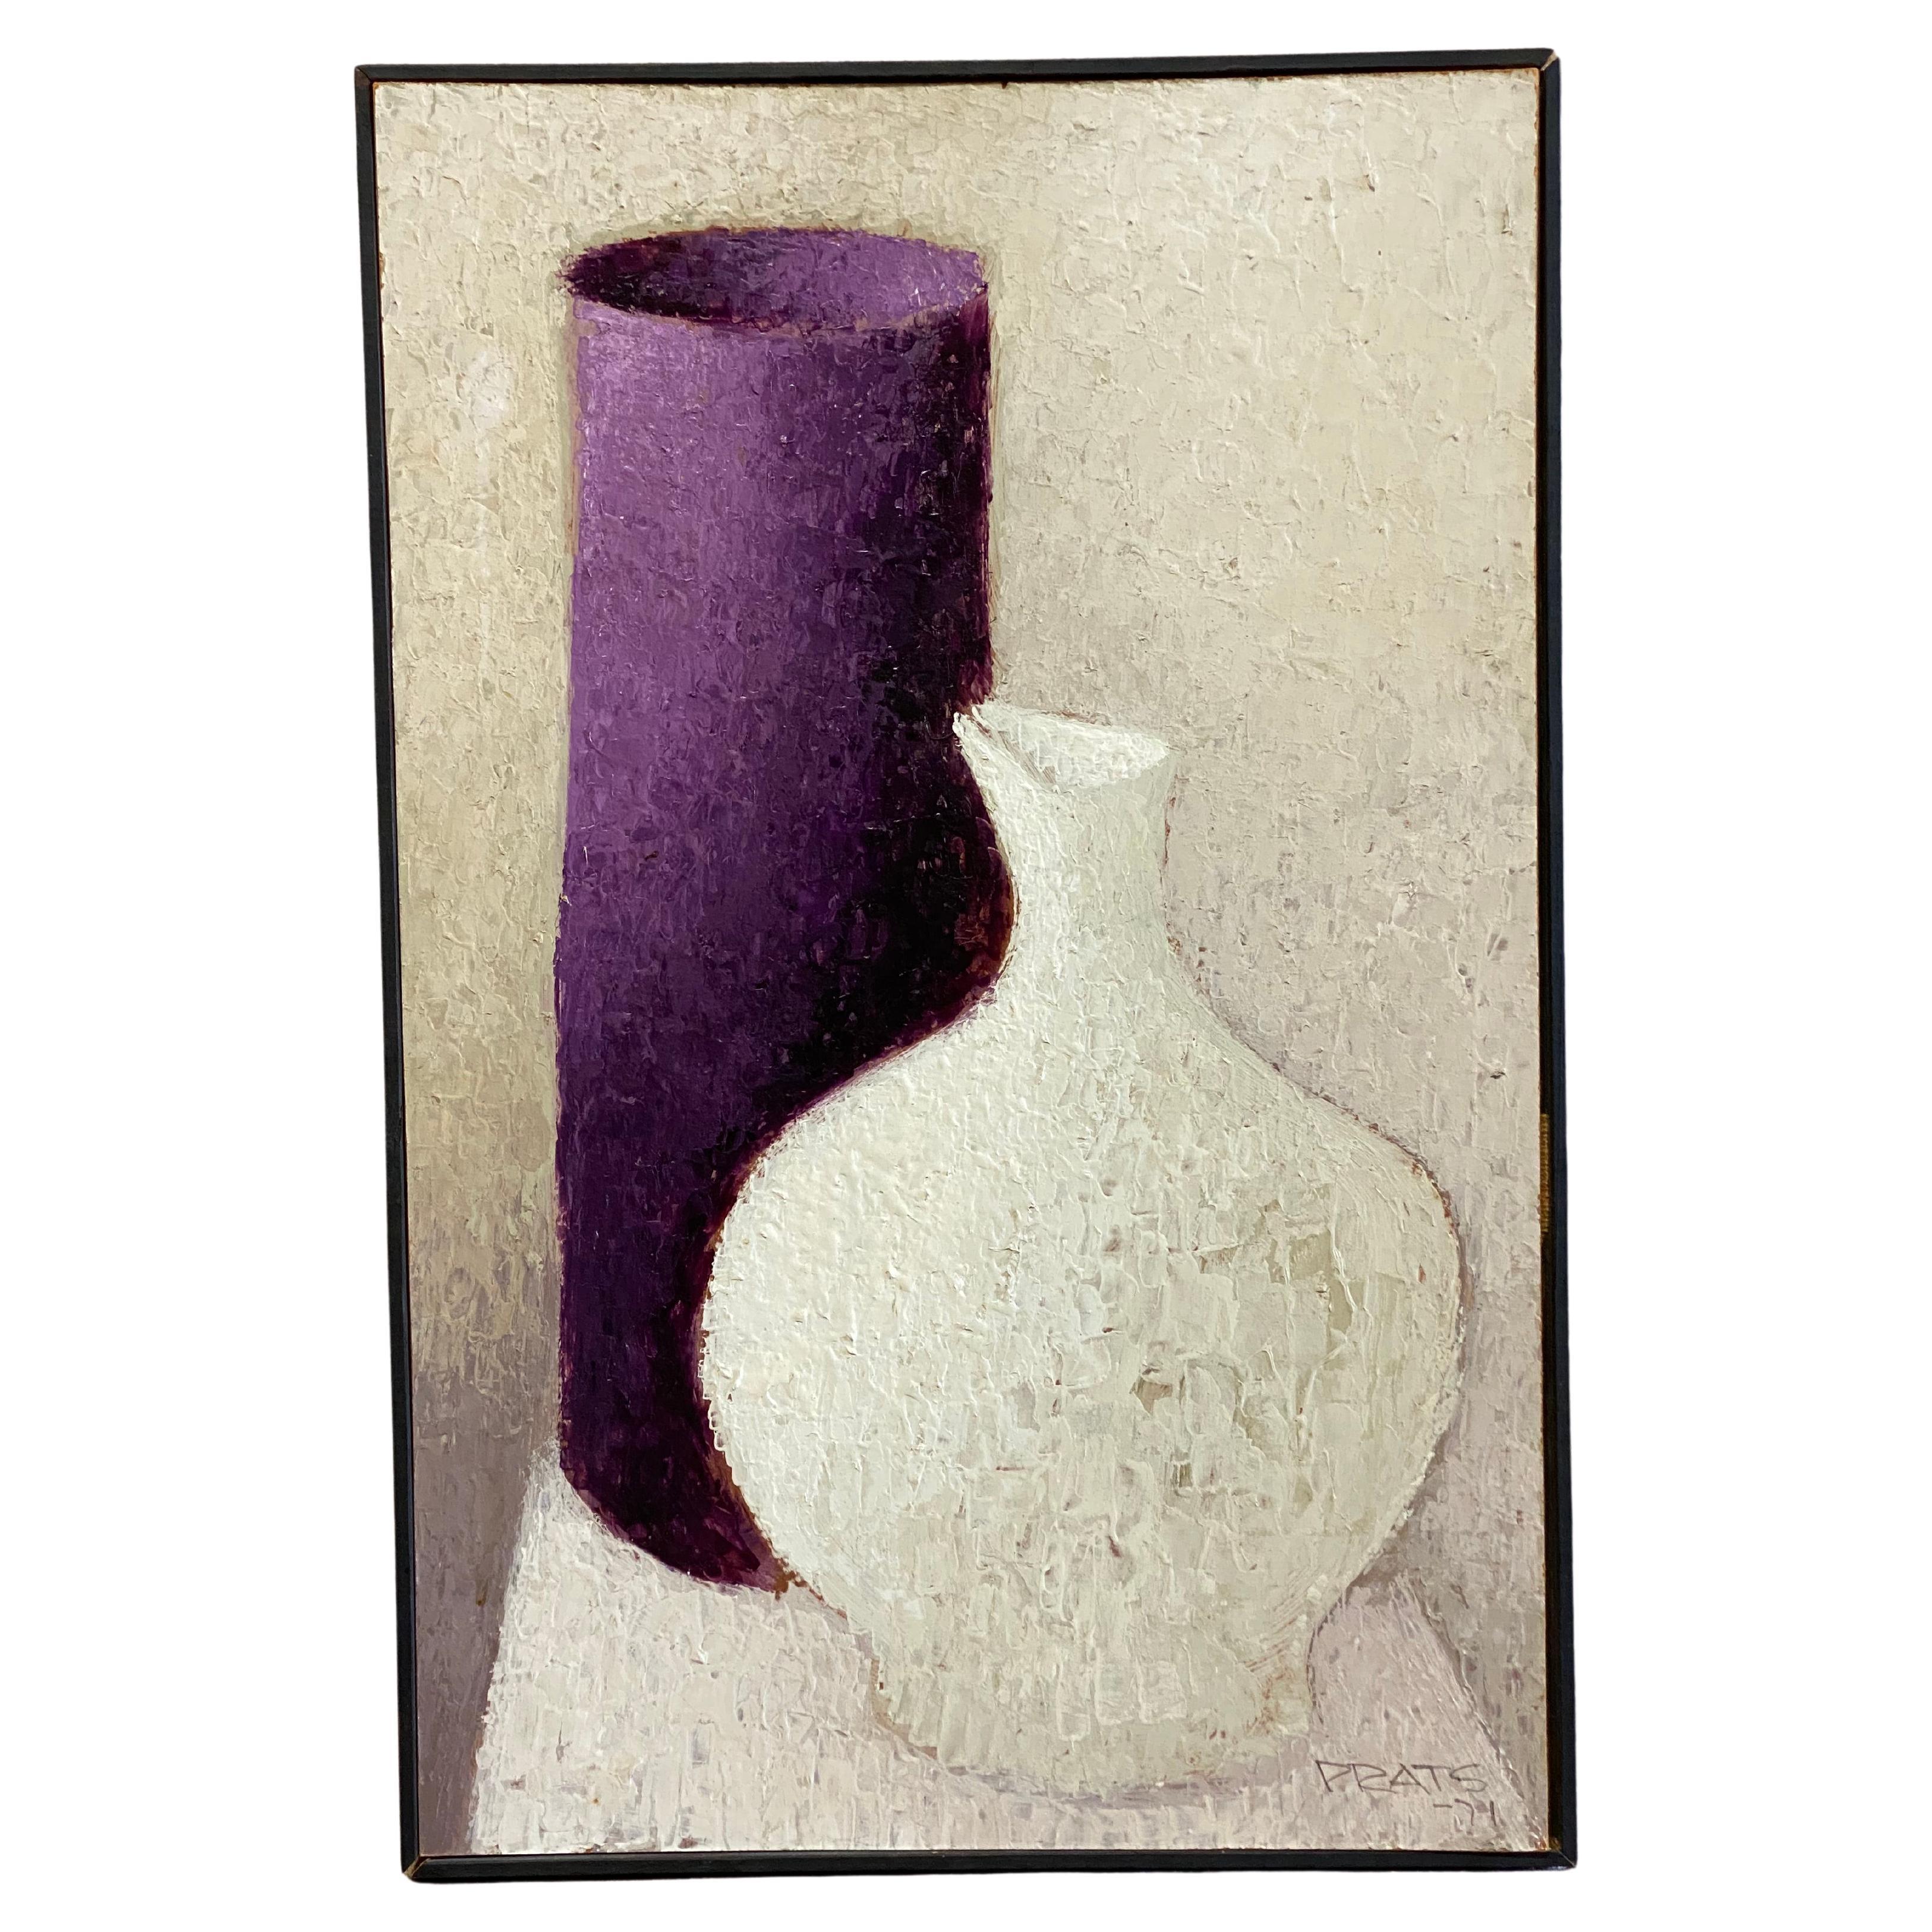 Mid Century Modern Still Life with Jug and Vase by Ramon Prats (1928-2003) For Sale